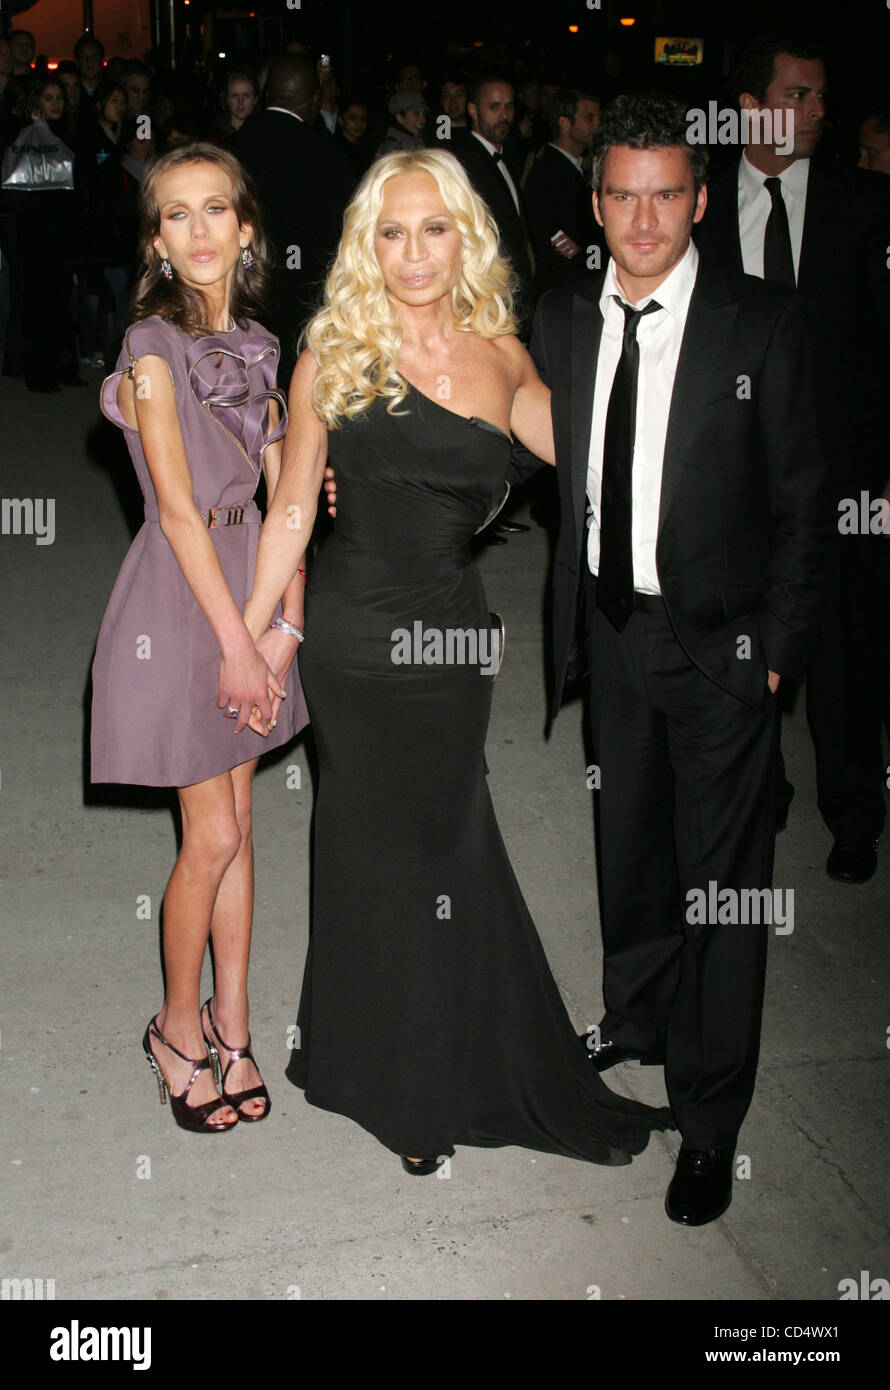 Oct 23, 2008 - New York, NY, USA - ALLEGRA VERSACE BECK, designer DONATELLA  VERSACE and actor BALTHAZAR GETTY at the arrivals for Fashion Group  International's 25th Annual Night of Stars held